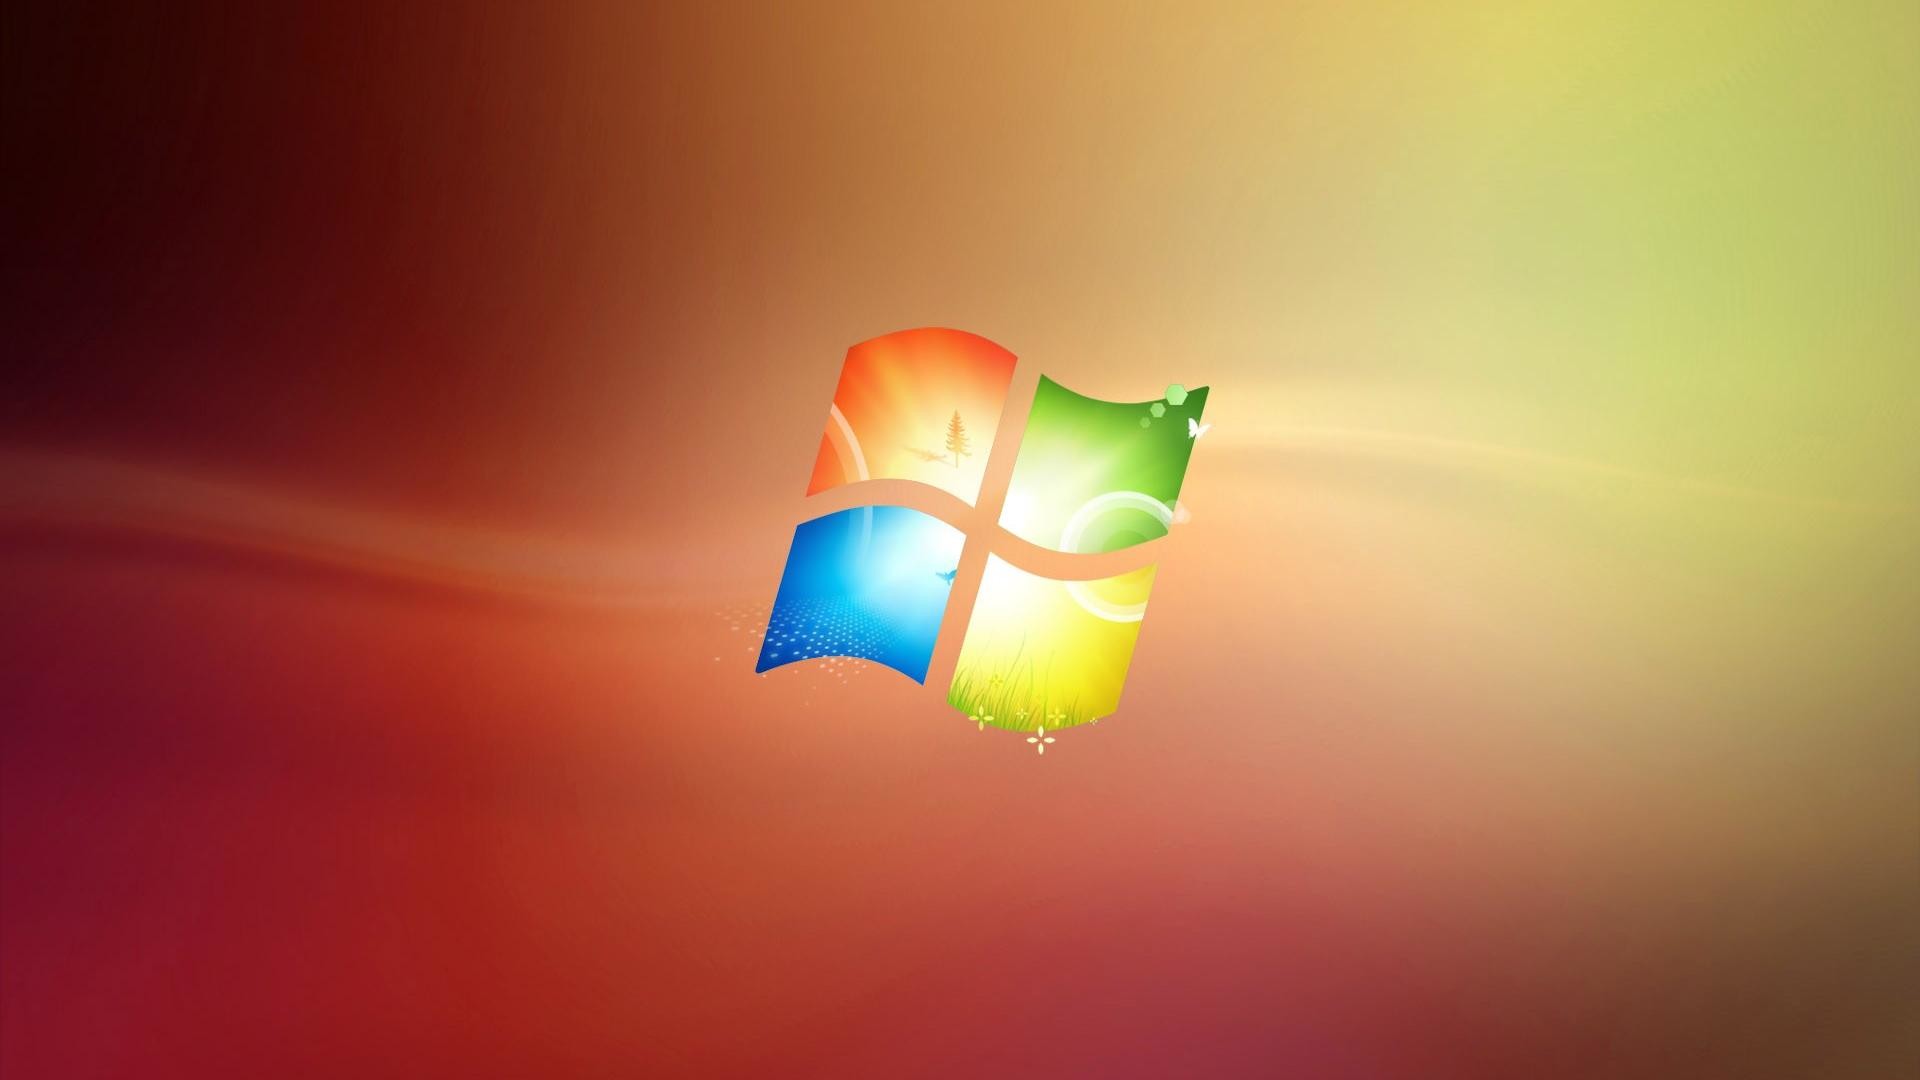 1920x1080  Cool Windows 7 system colorful backgrounds wide wallpapers:1280x800,1440x900,1680x1050  -